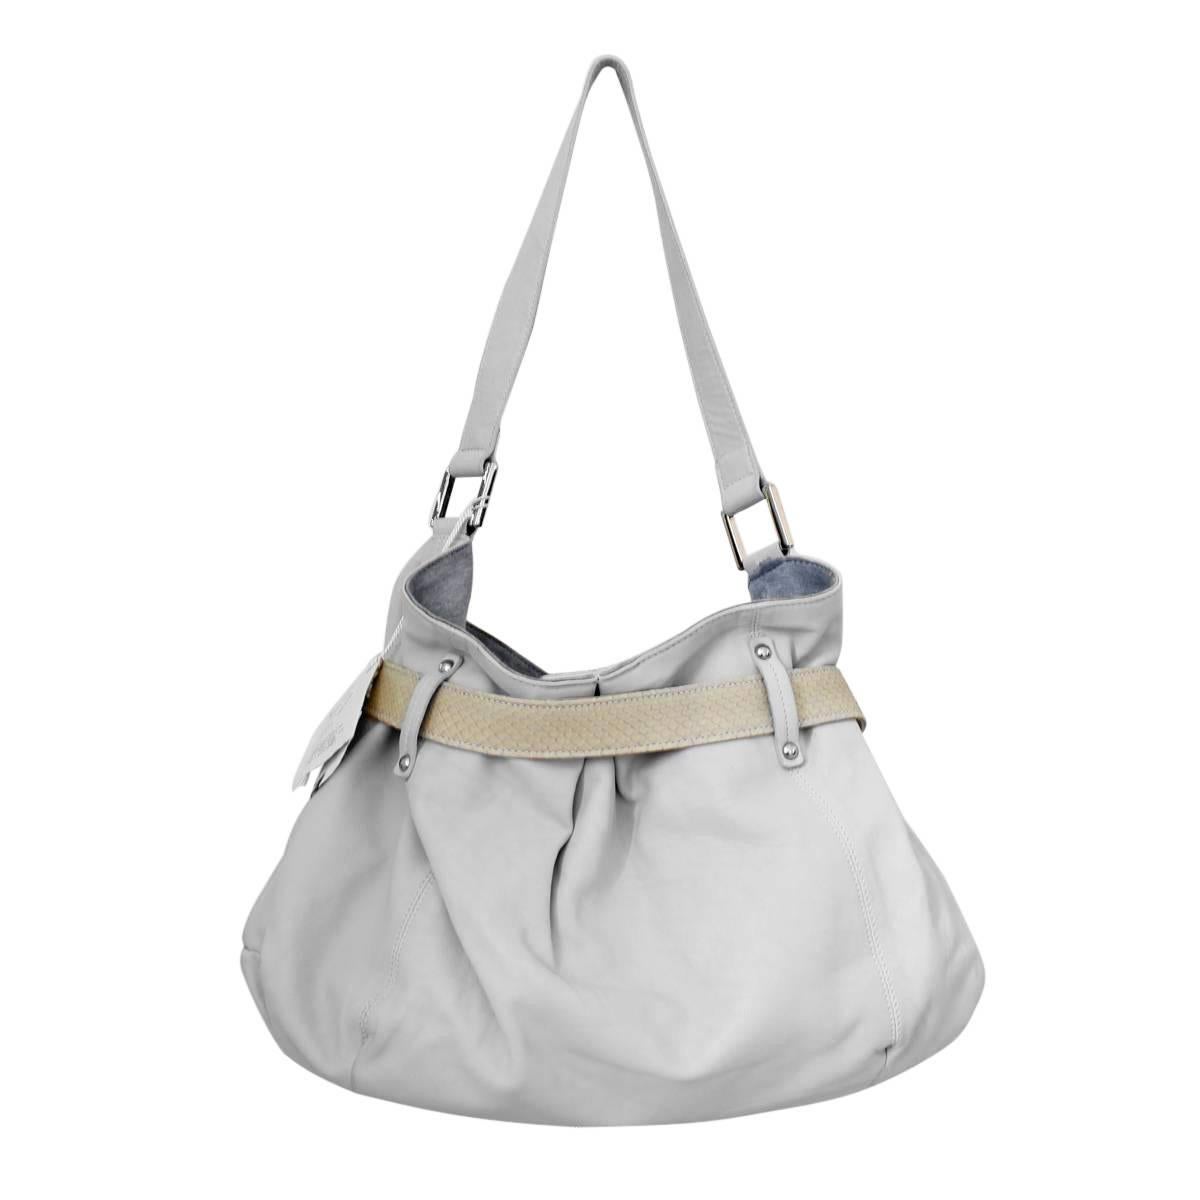 Top quality for this brand new and beautiful Brunello Cucinelli bag
Supersoft leather, nappa
Superlight
Ice color
Internal zip pocket
Cm 42 x 26 (16.5 x 10.2 inches)
Made in Italy
Worldwide express shipping included in the price !